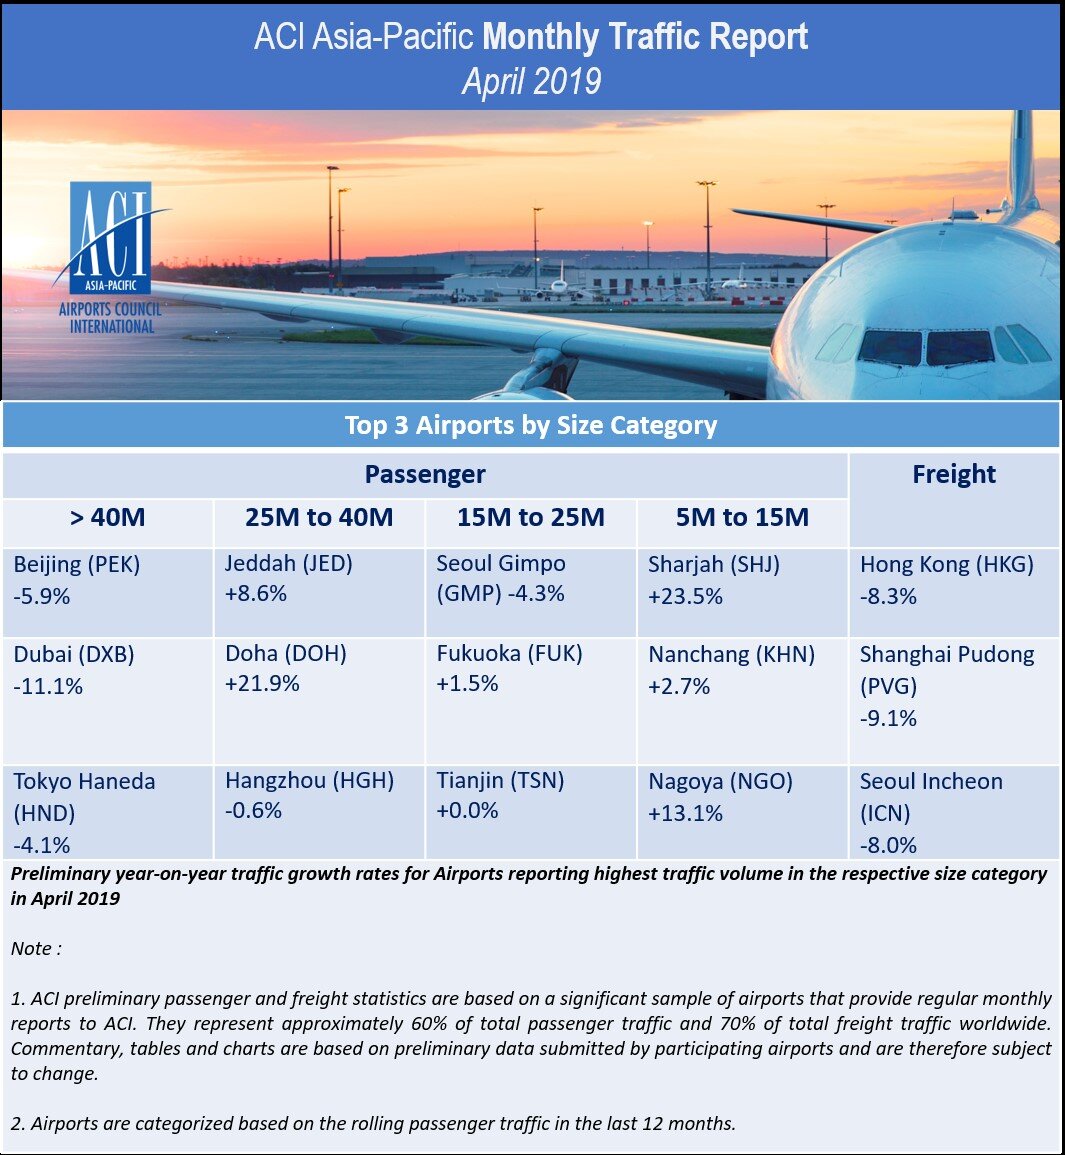 April 2019: Passengers down -1.0% in Asia-Pacific and up 3.3% in Middle East